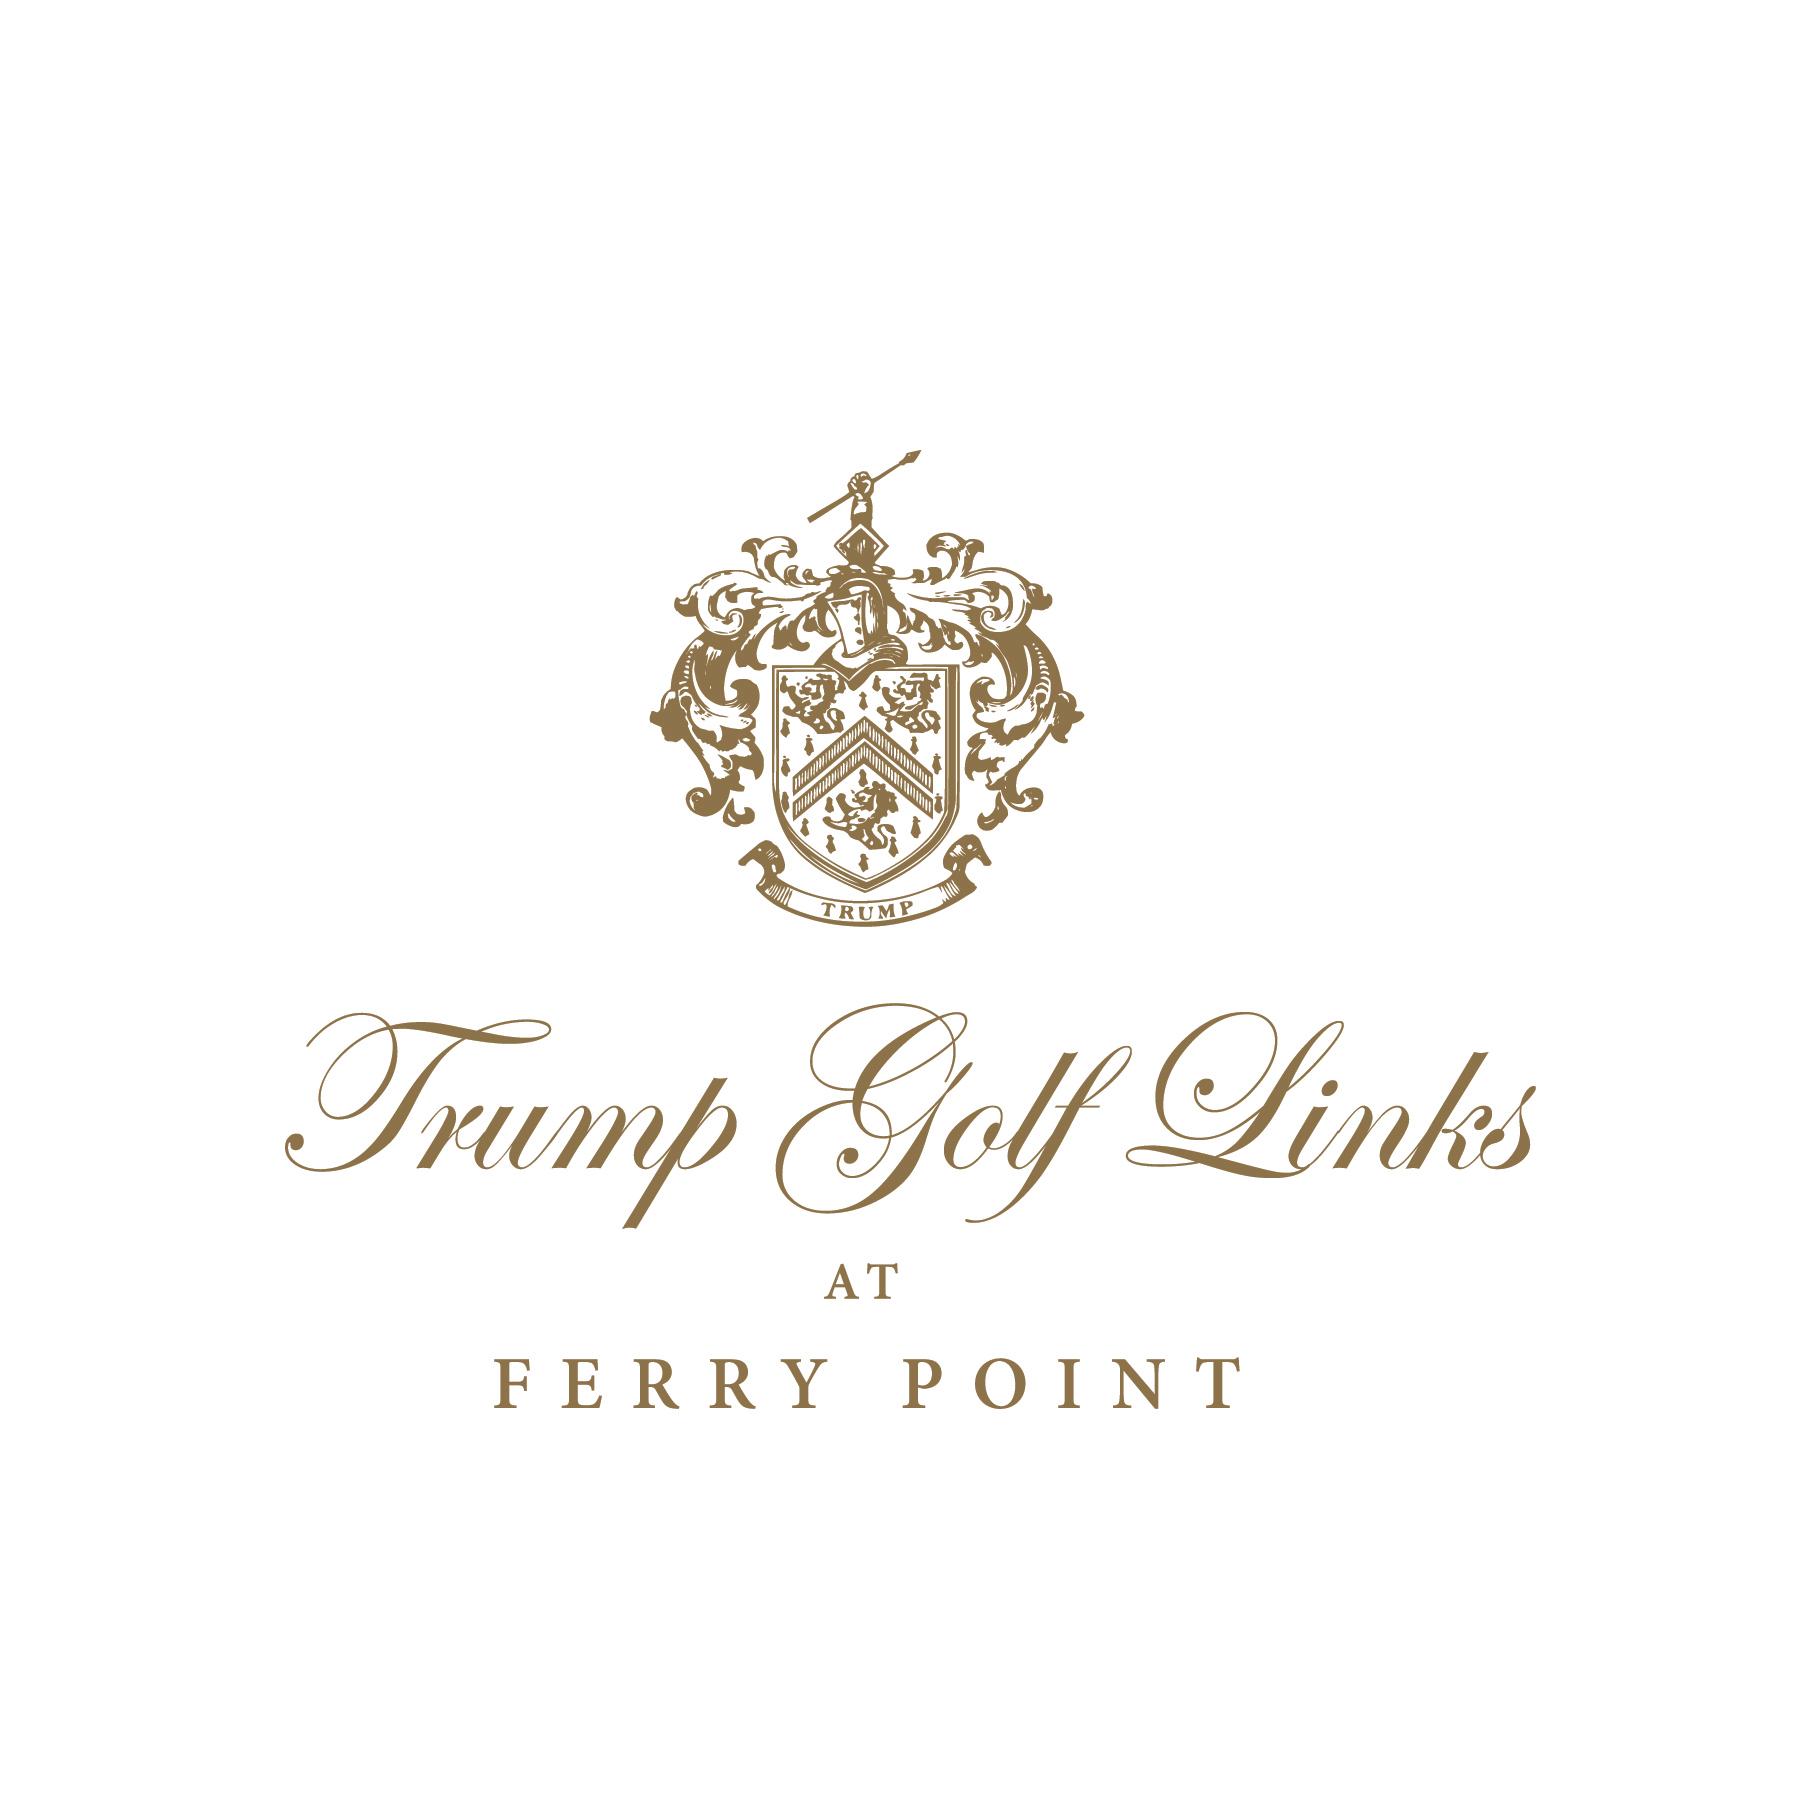 Trump Golf Links at Ferry Point - Bronx, NY 10465 - (718)414-1555 | ShowMeLocal.com